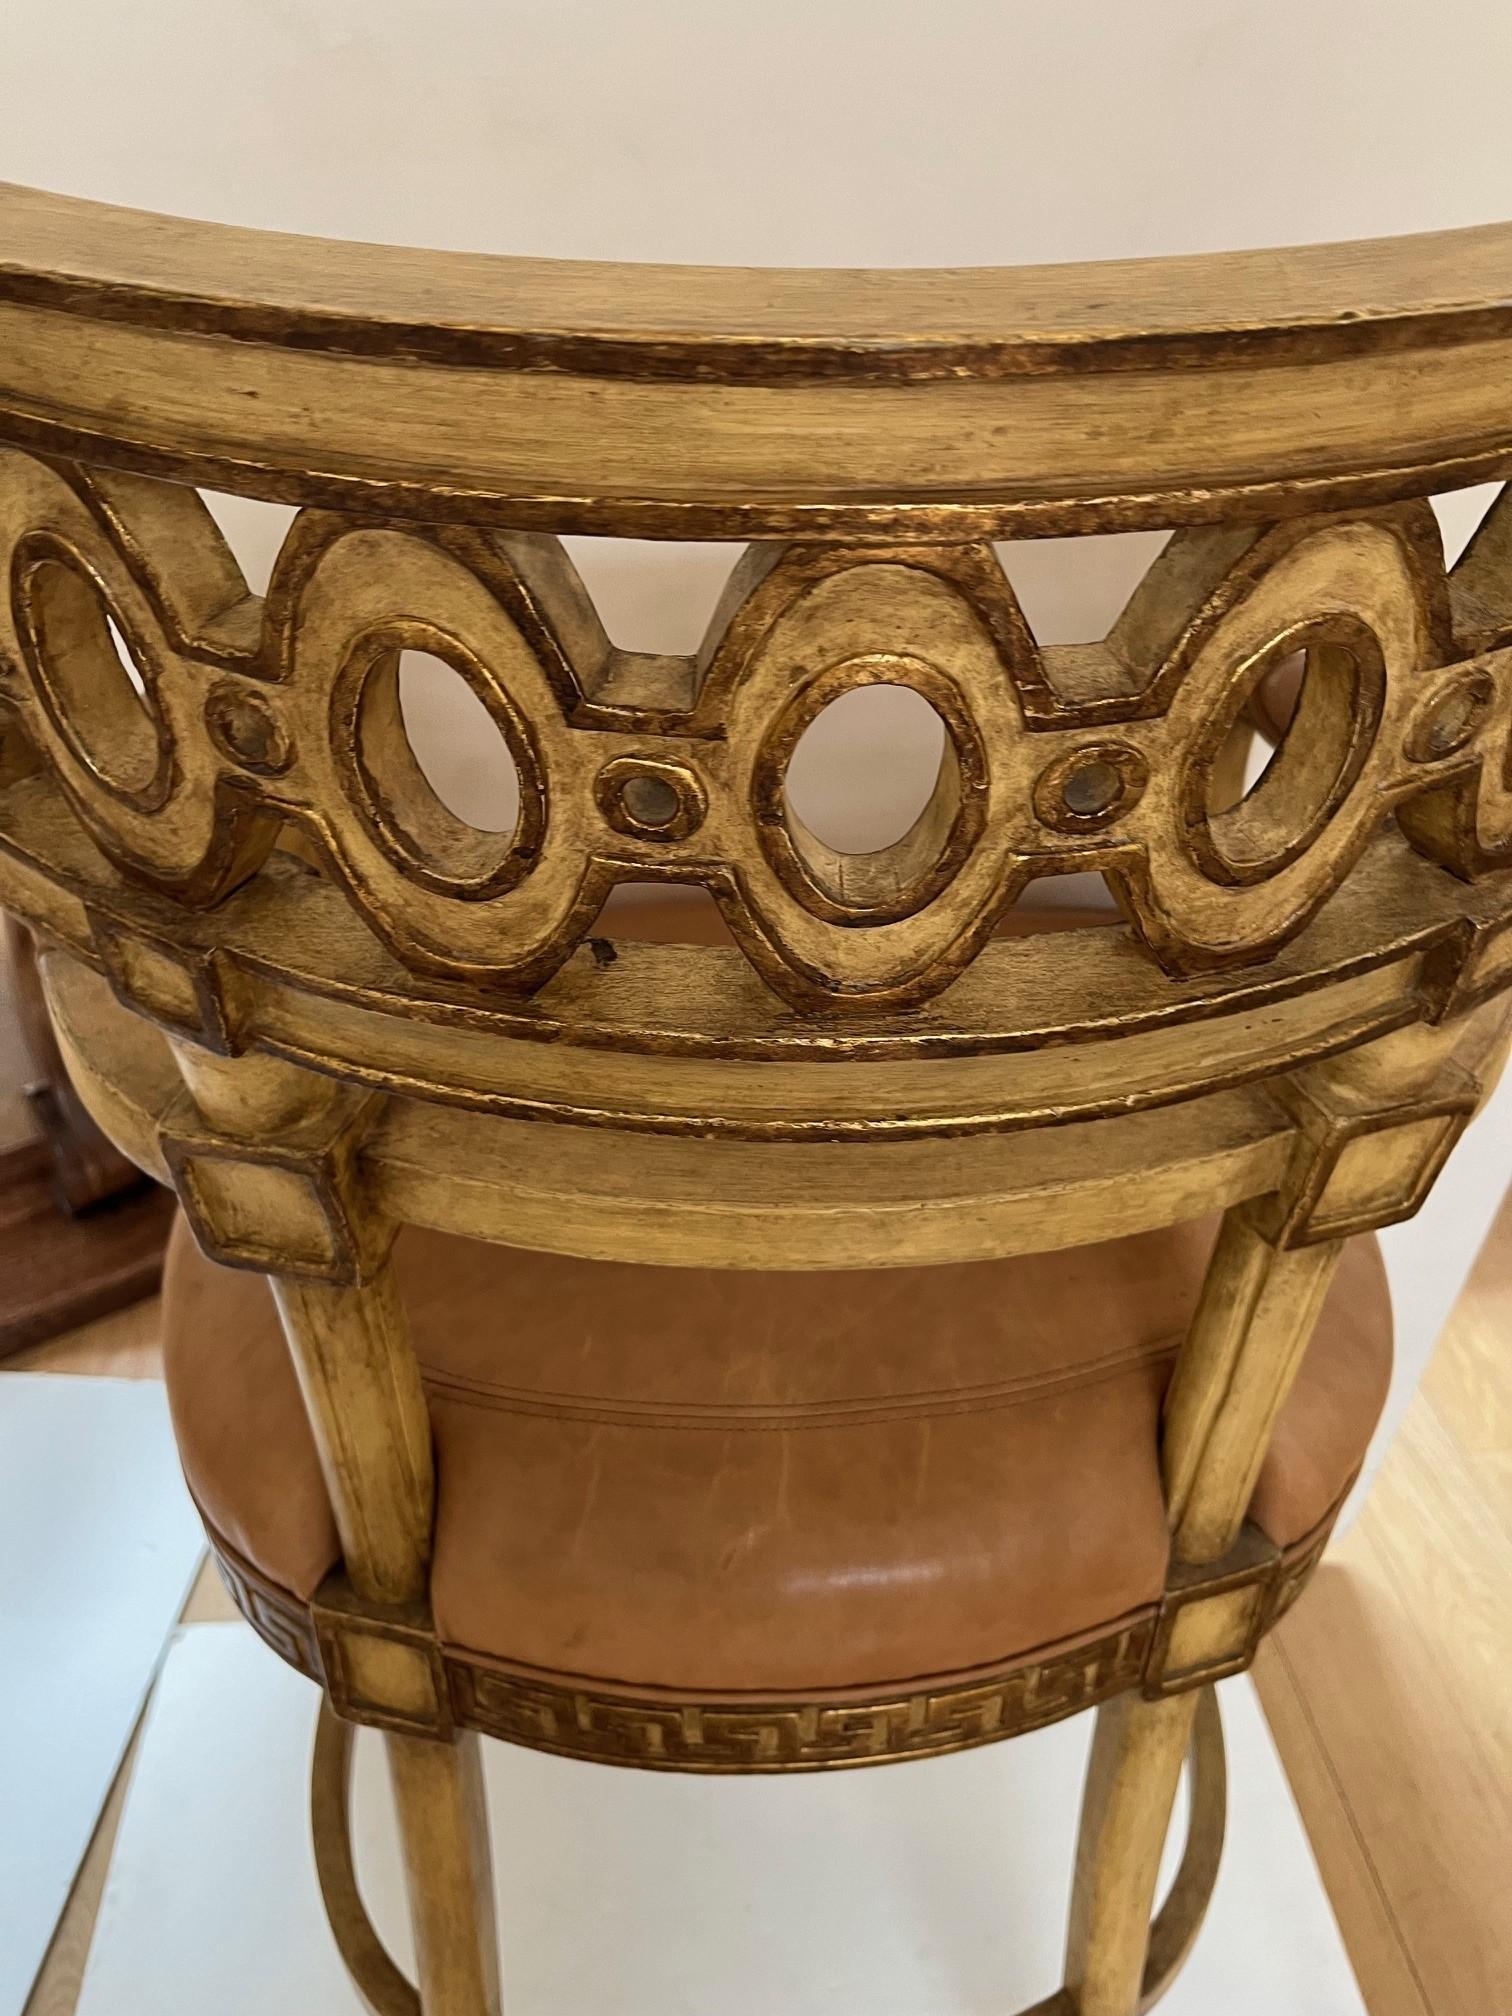 Made to Order Venetian Bar Stool in Antique Painted Finish with Gilded Detail For Sale 9